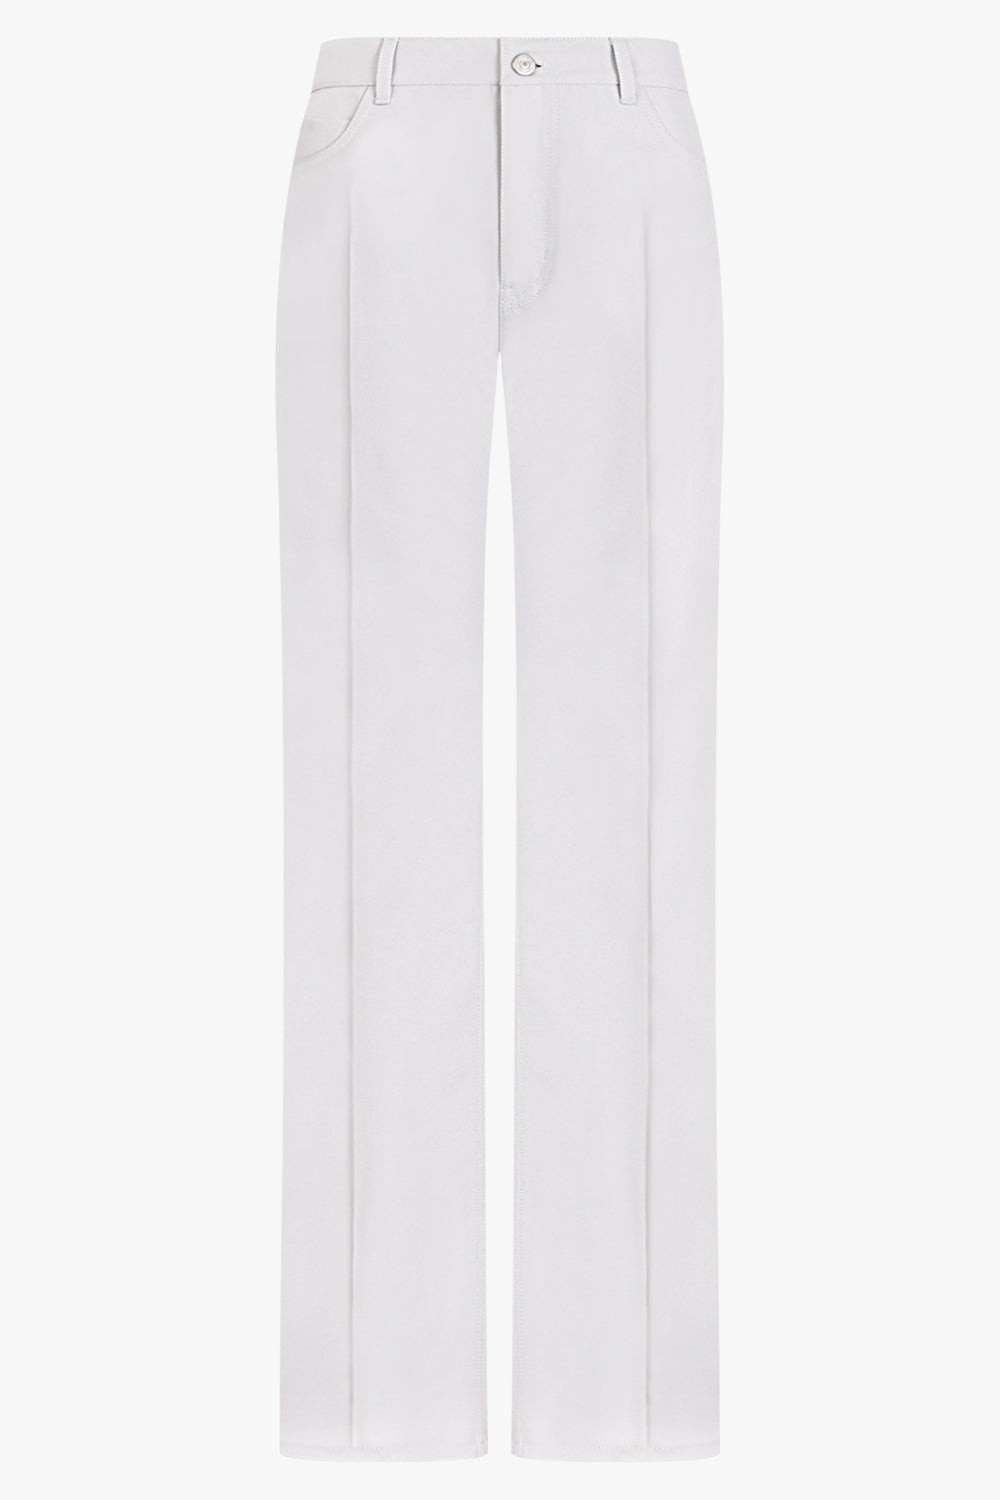 70'S BOOTCUT WORKWEAR PANT | DIRTY WHITE - 1